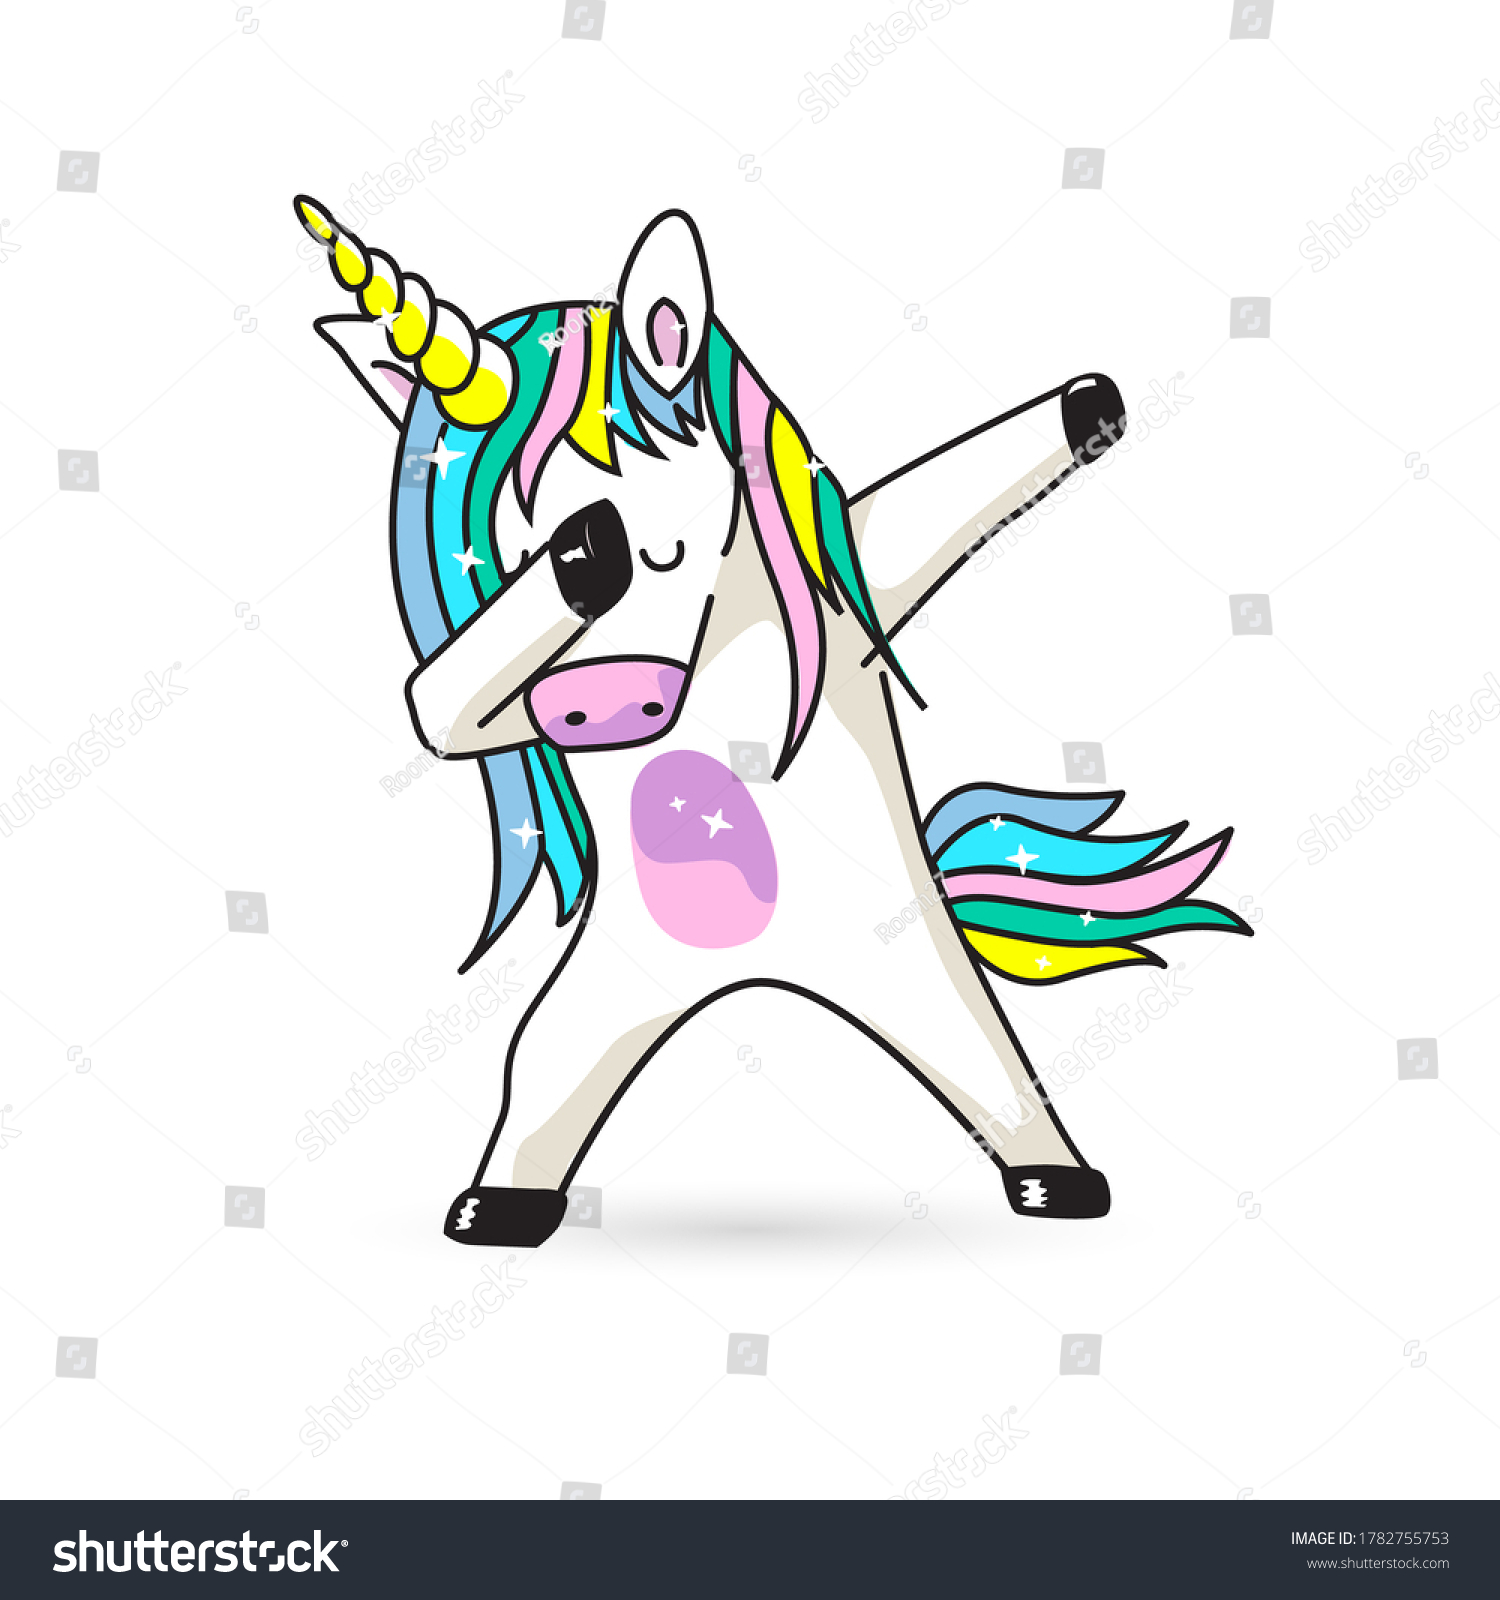 SVG of Unicorn doing the dab dance move, funny vector design svg